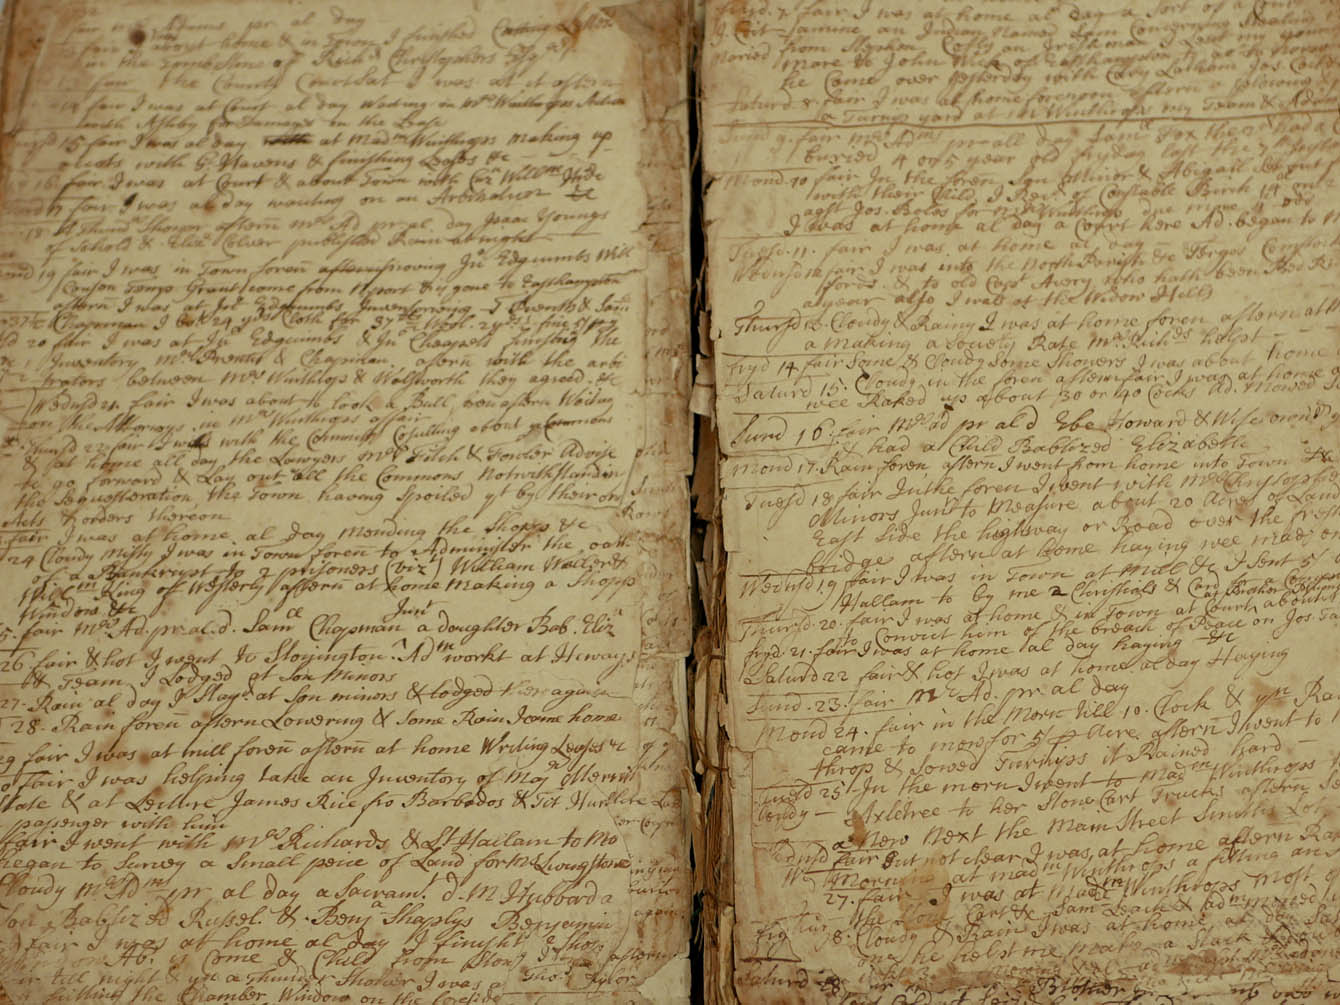 A page of the Joshua Hempted diary